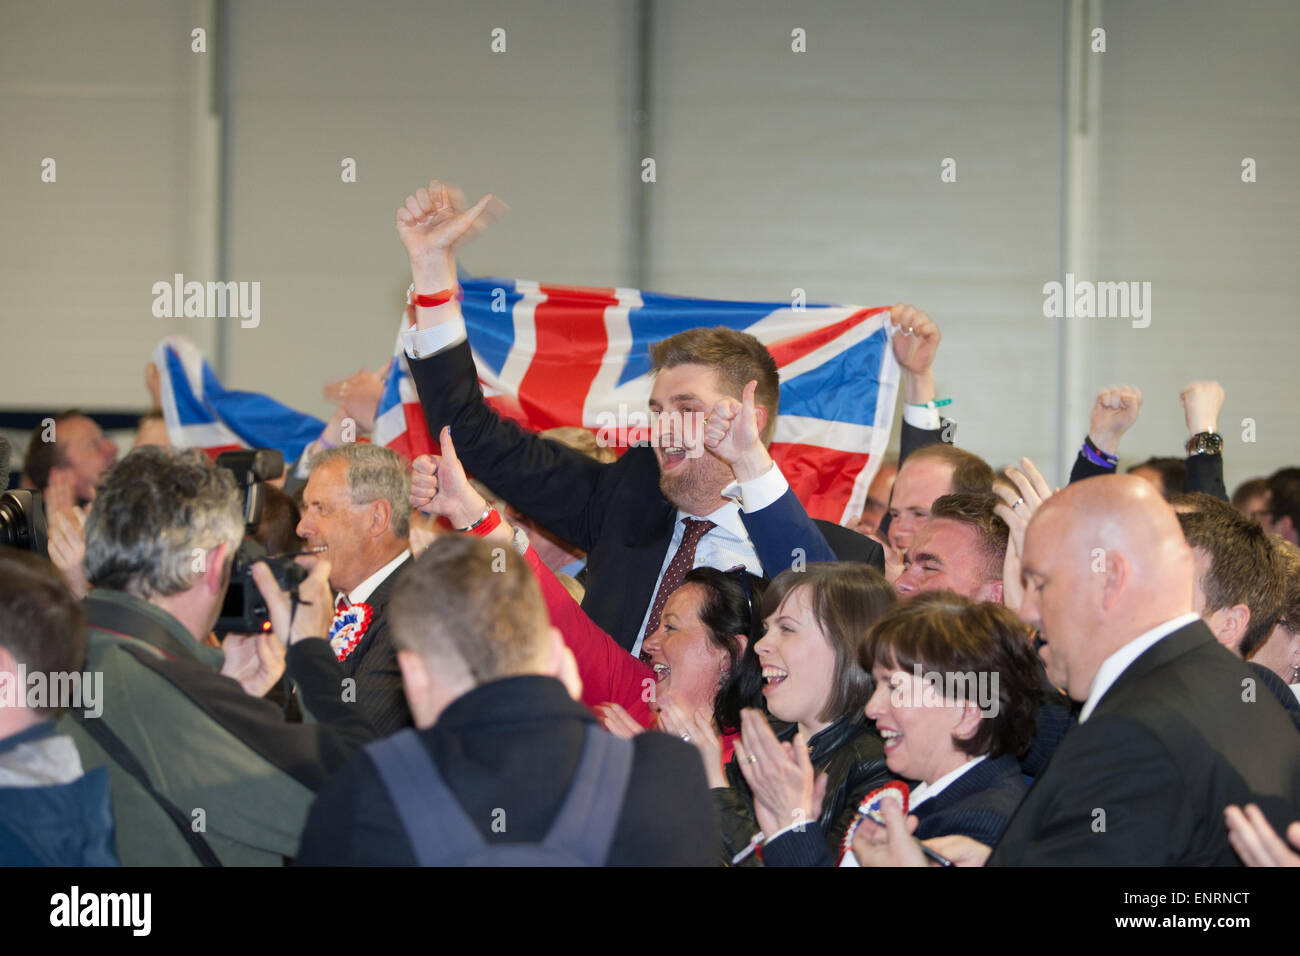 Belfast UK. 7th May 2015 General Election: Democratic unionist party (DUP) supporter celebratie after  Gavin Robinson won the se Stock Photo